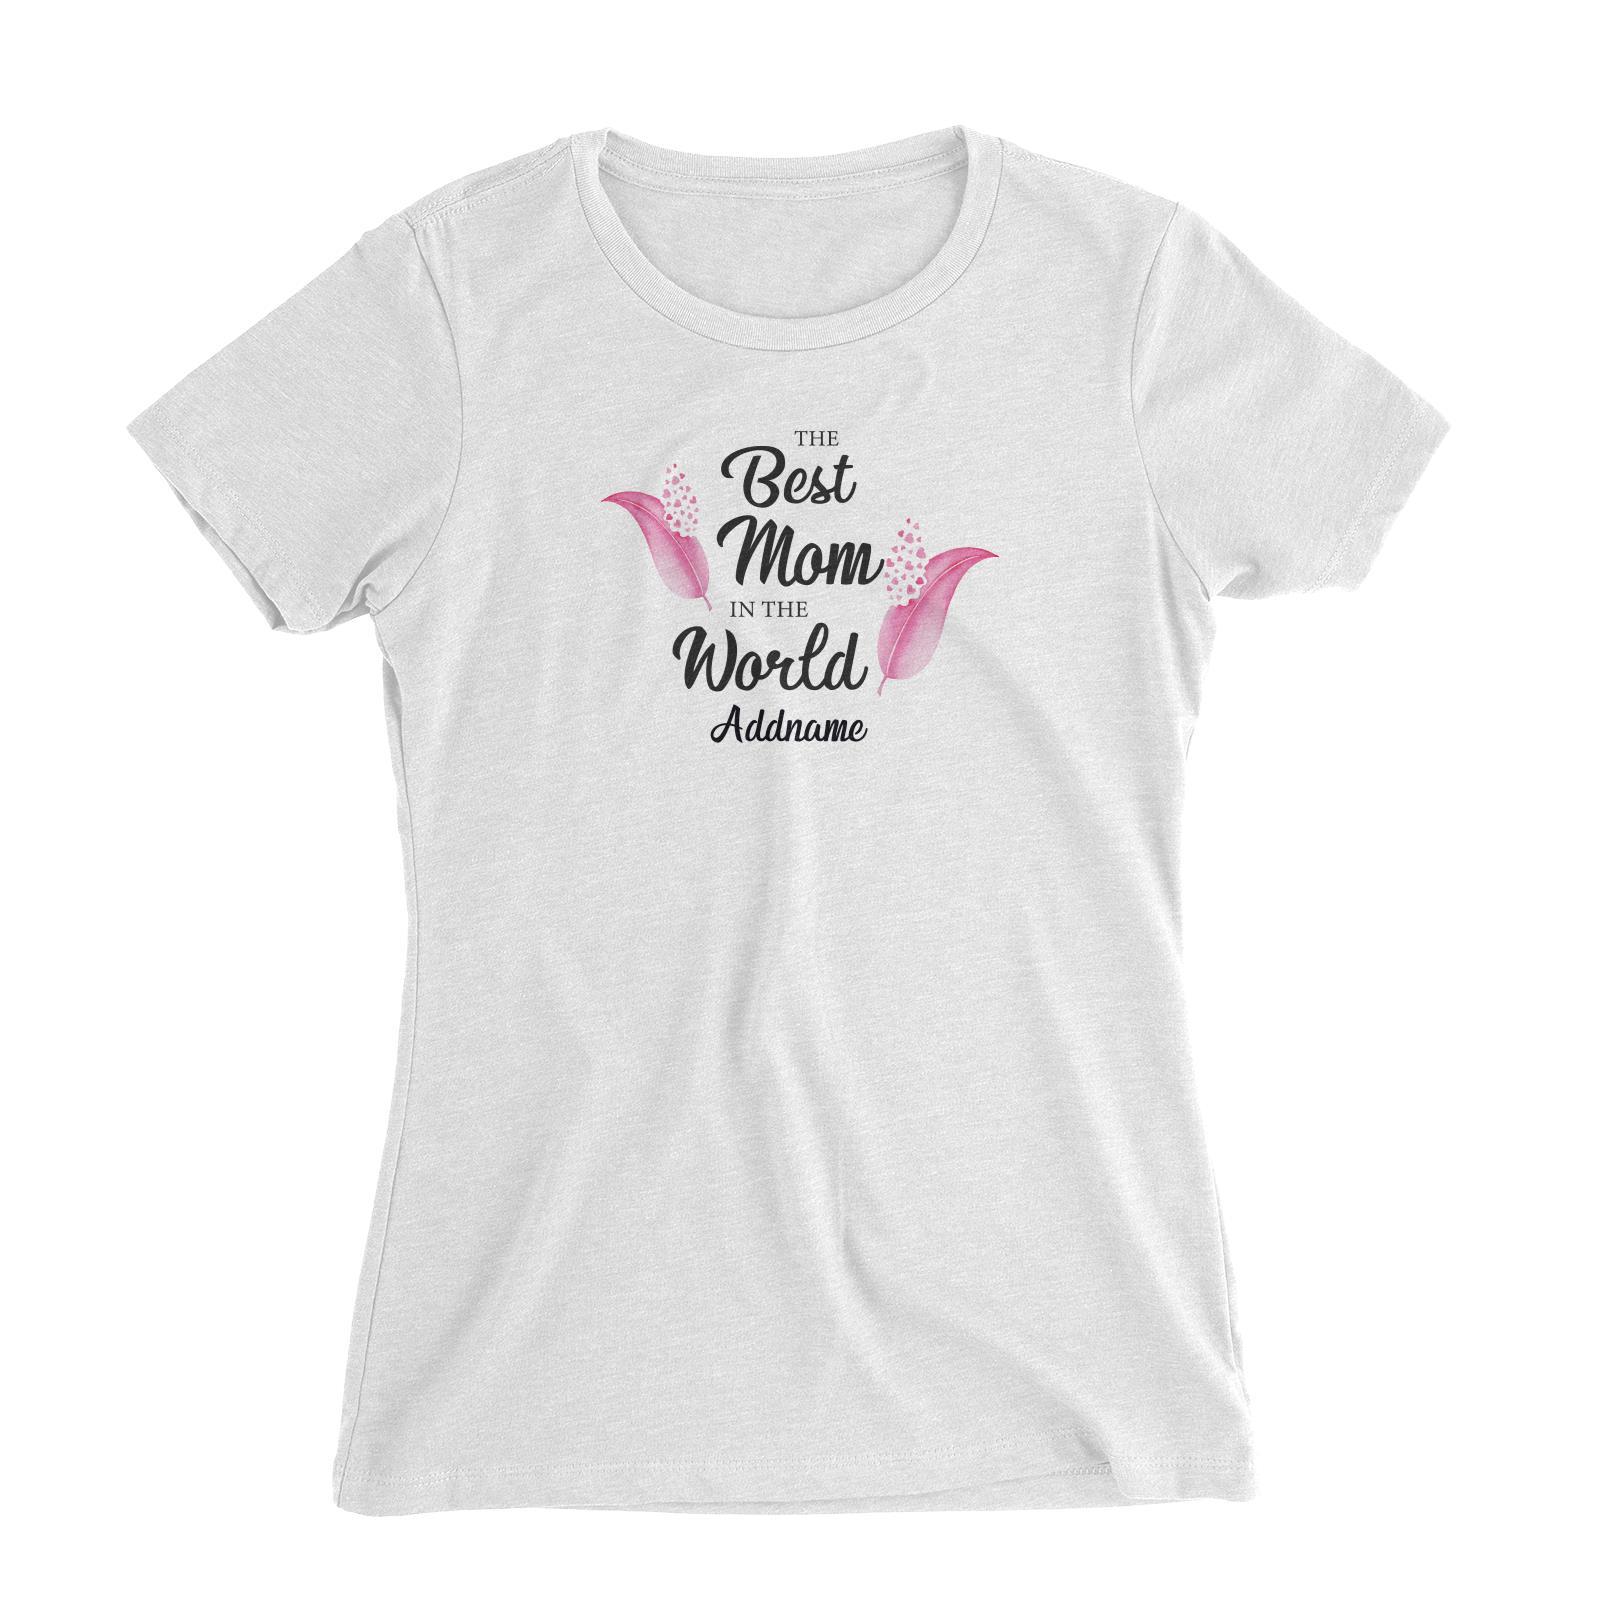 Sweet Mom Quotes 1 Love Feathers The Best Mom In The World Addname Women's Slim Fit T-Shirt